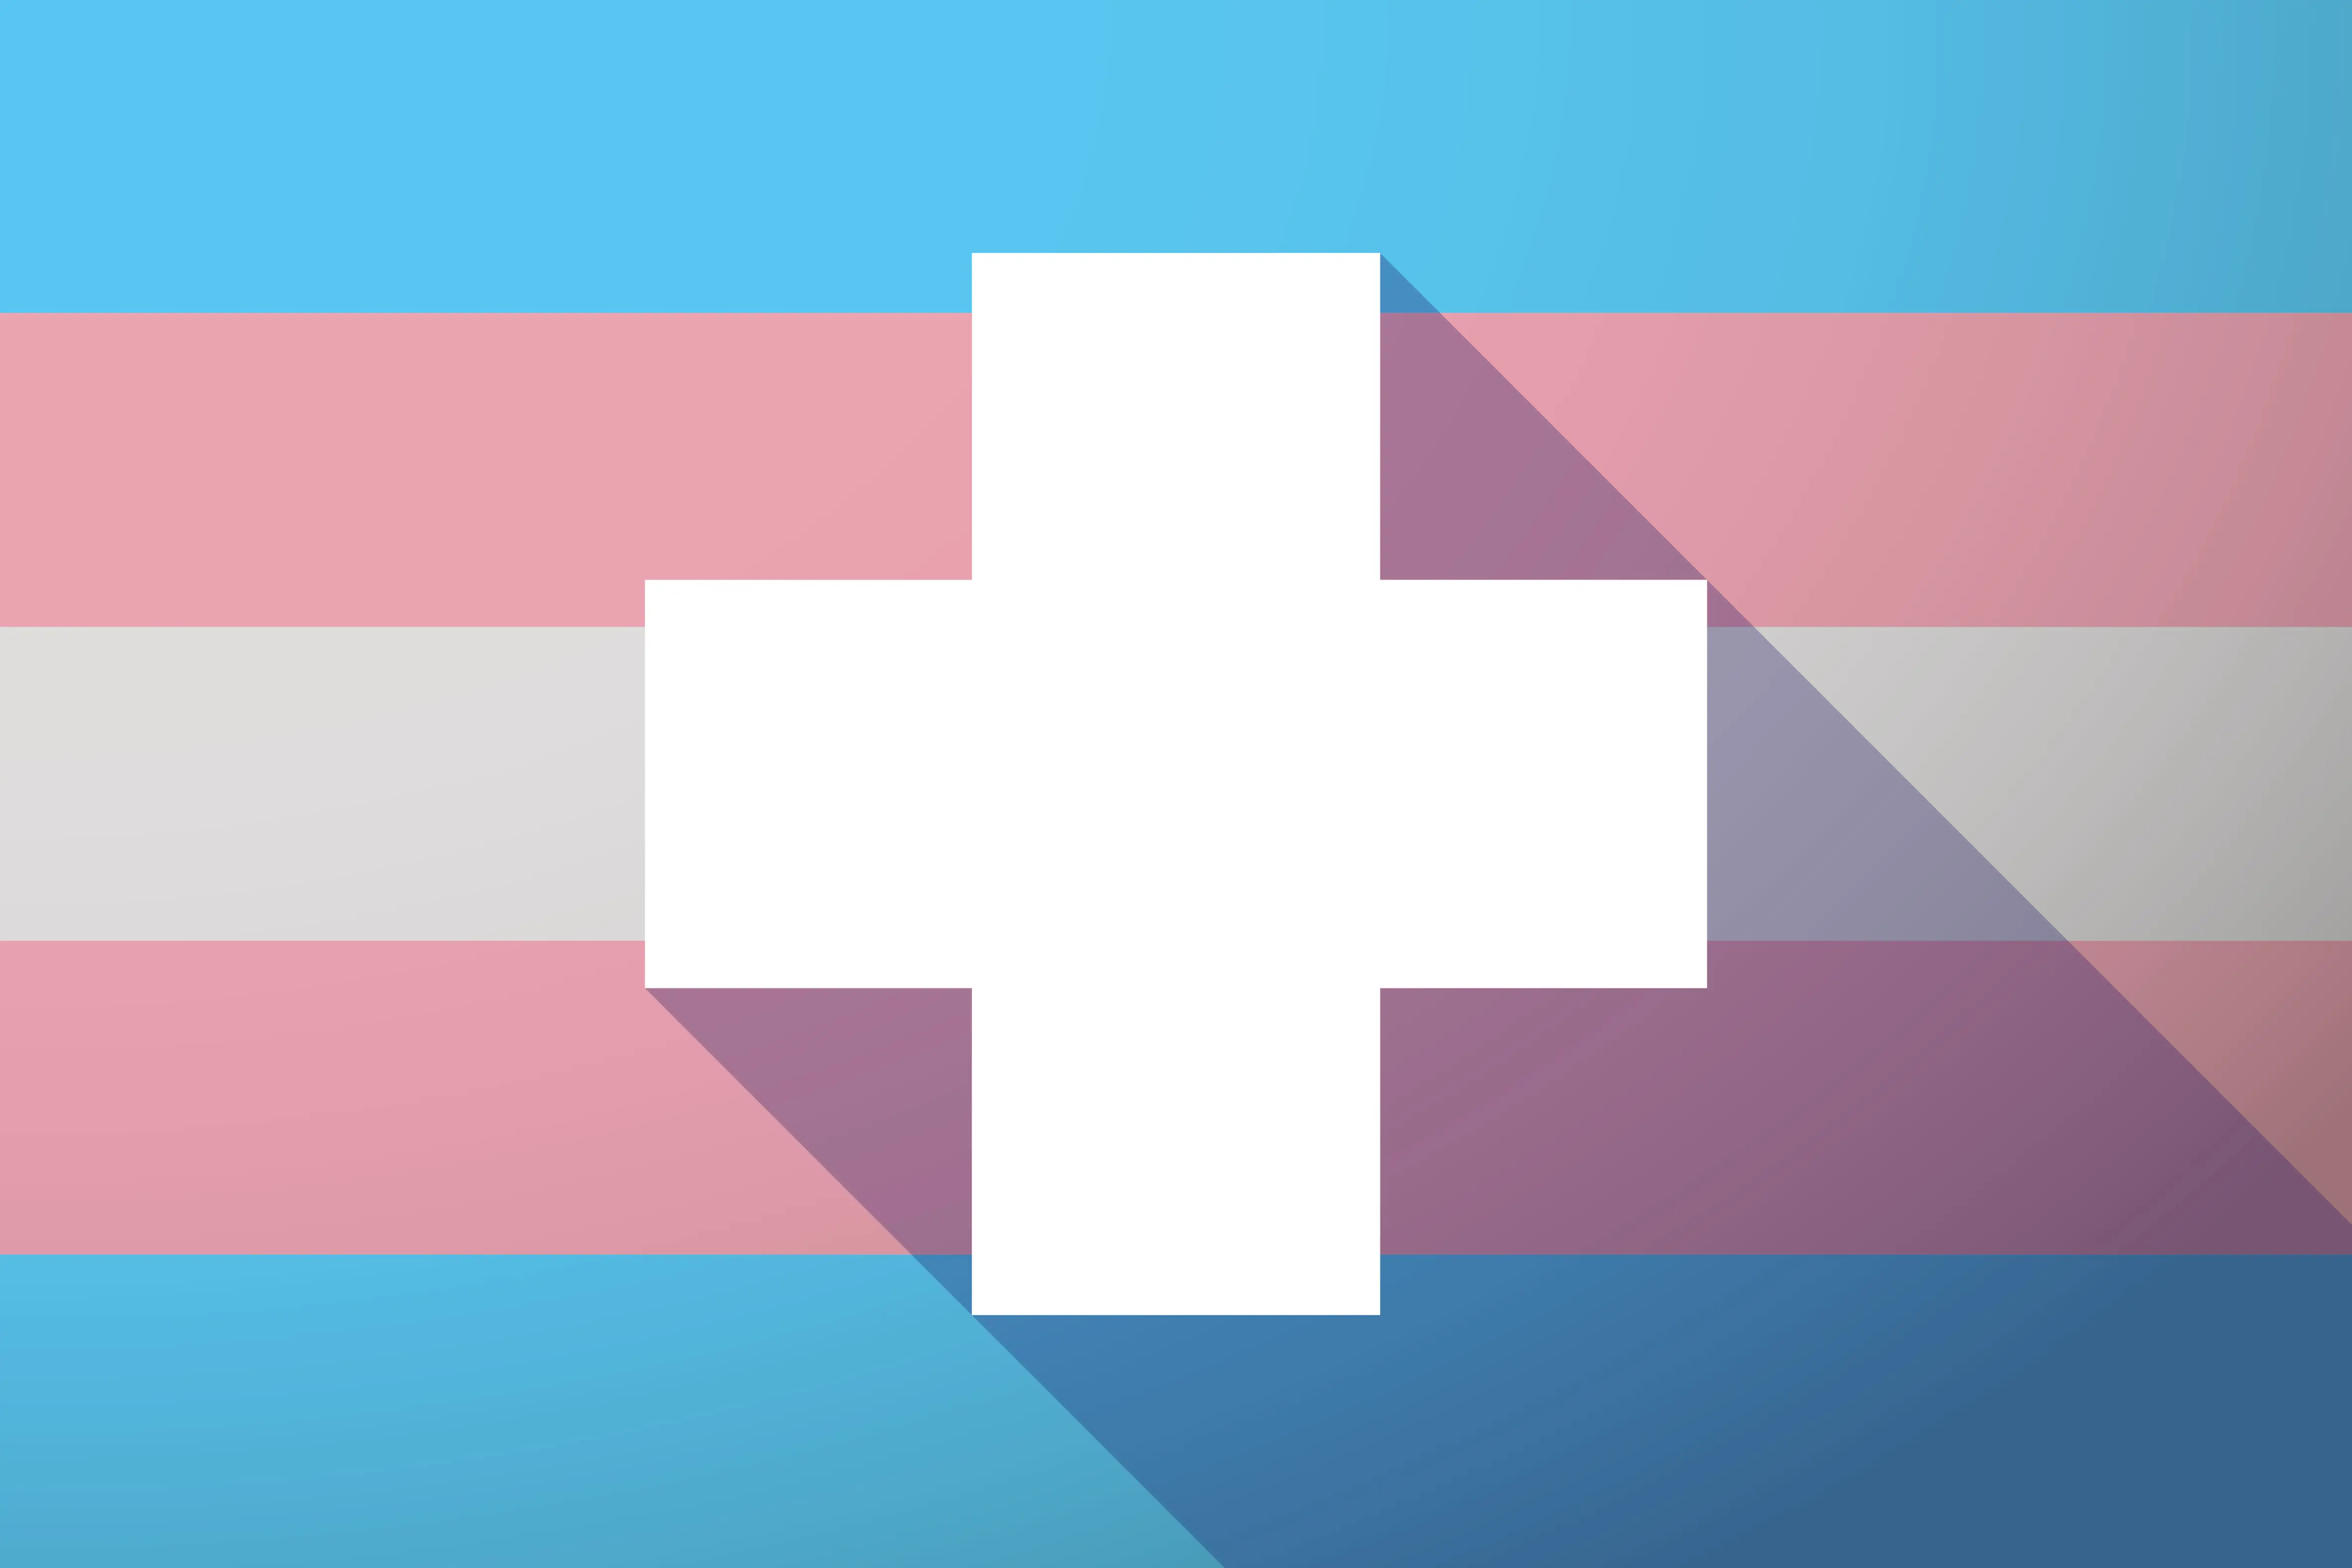 One-third of transgender individuals report being denied medical care or being harassed by medical experts as they are transgender.